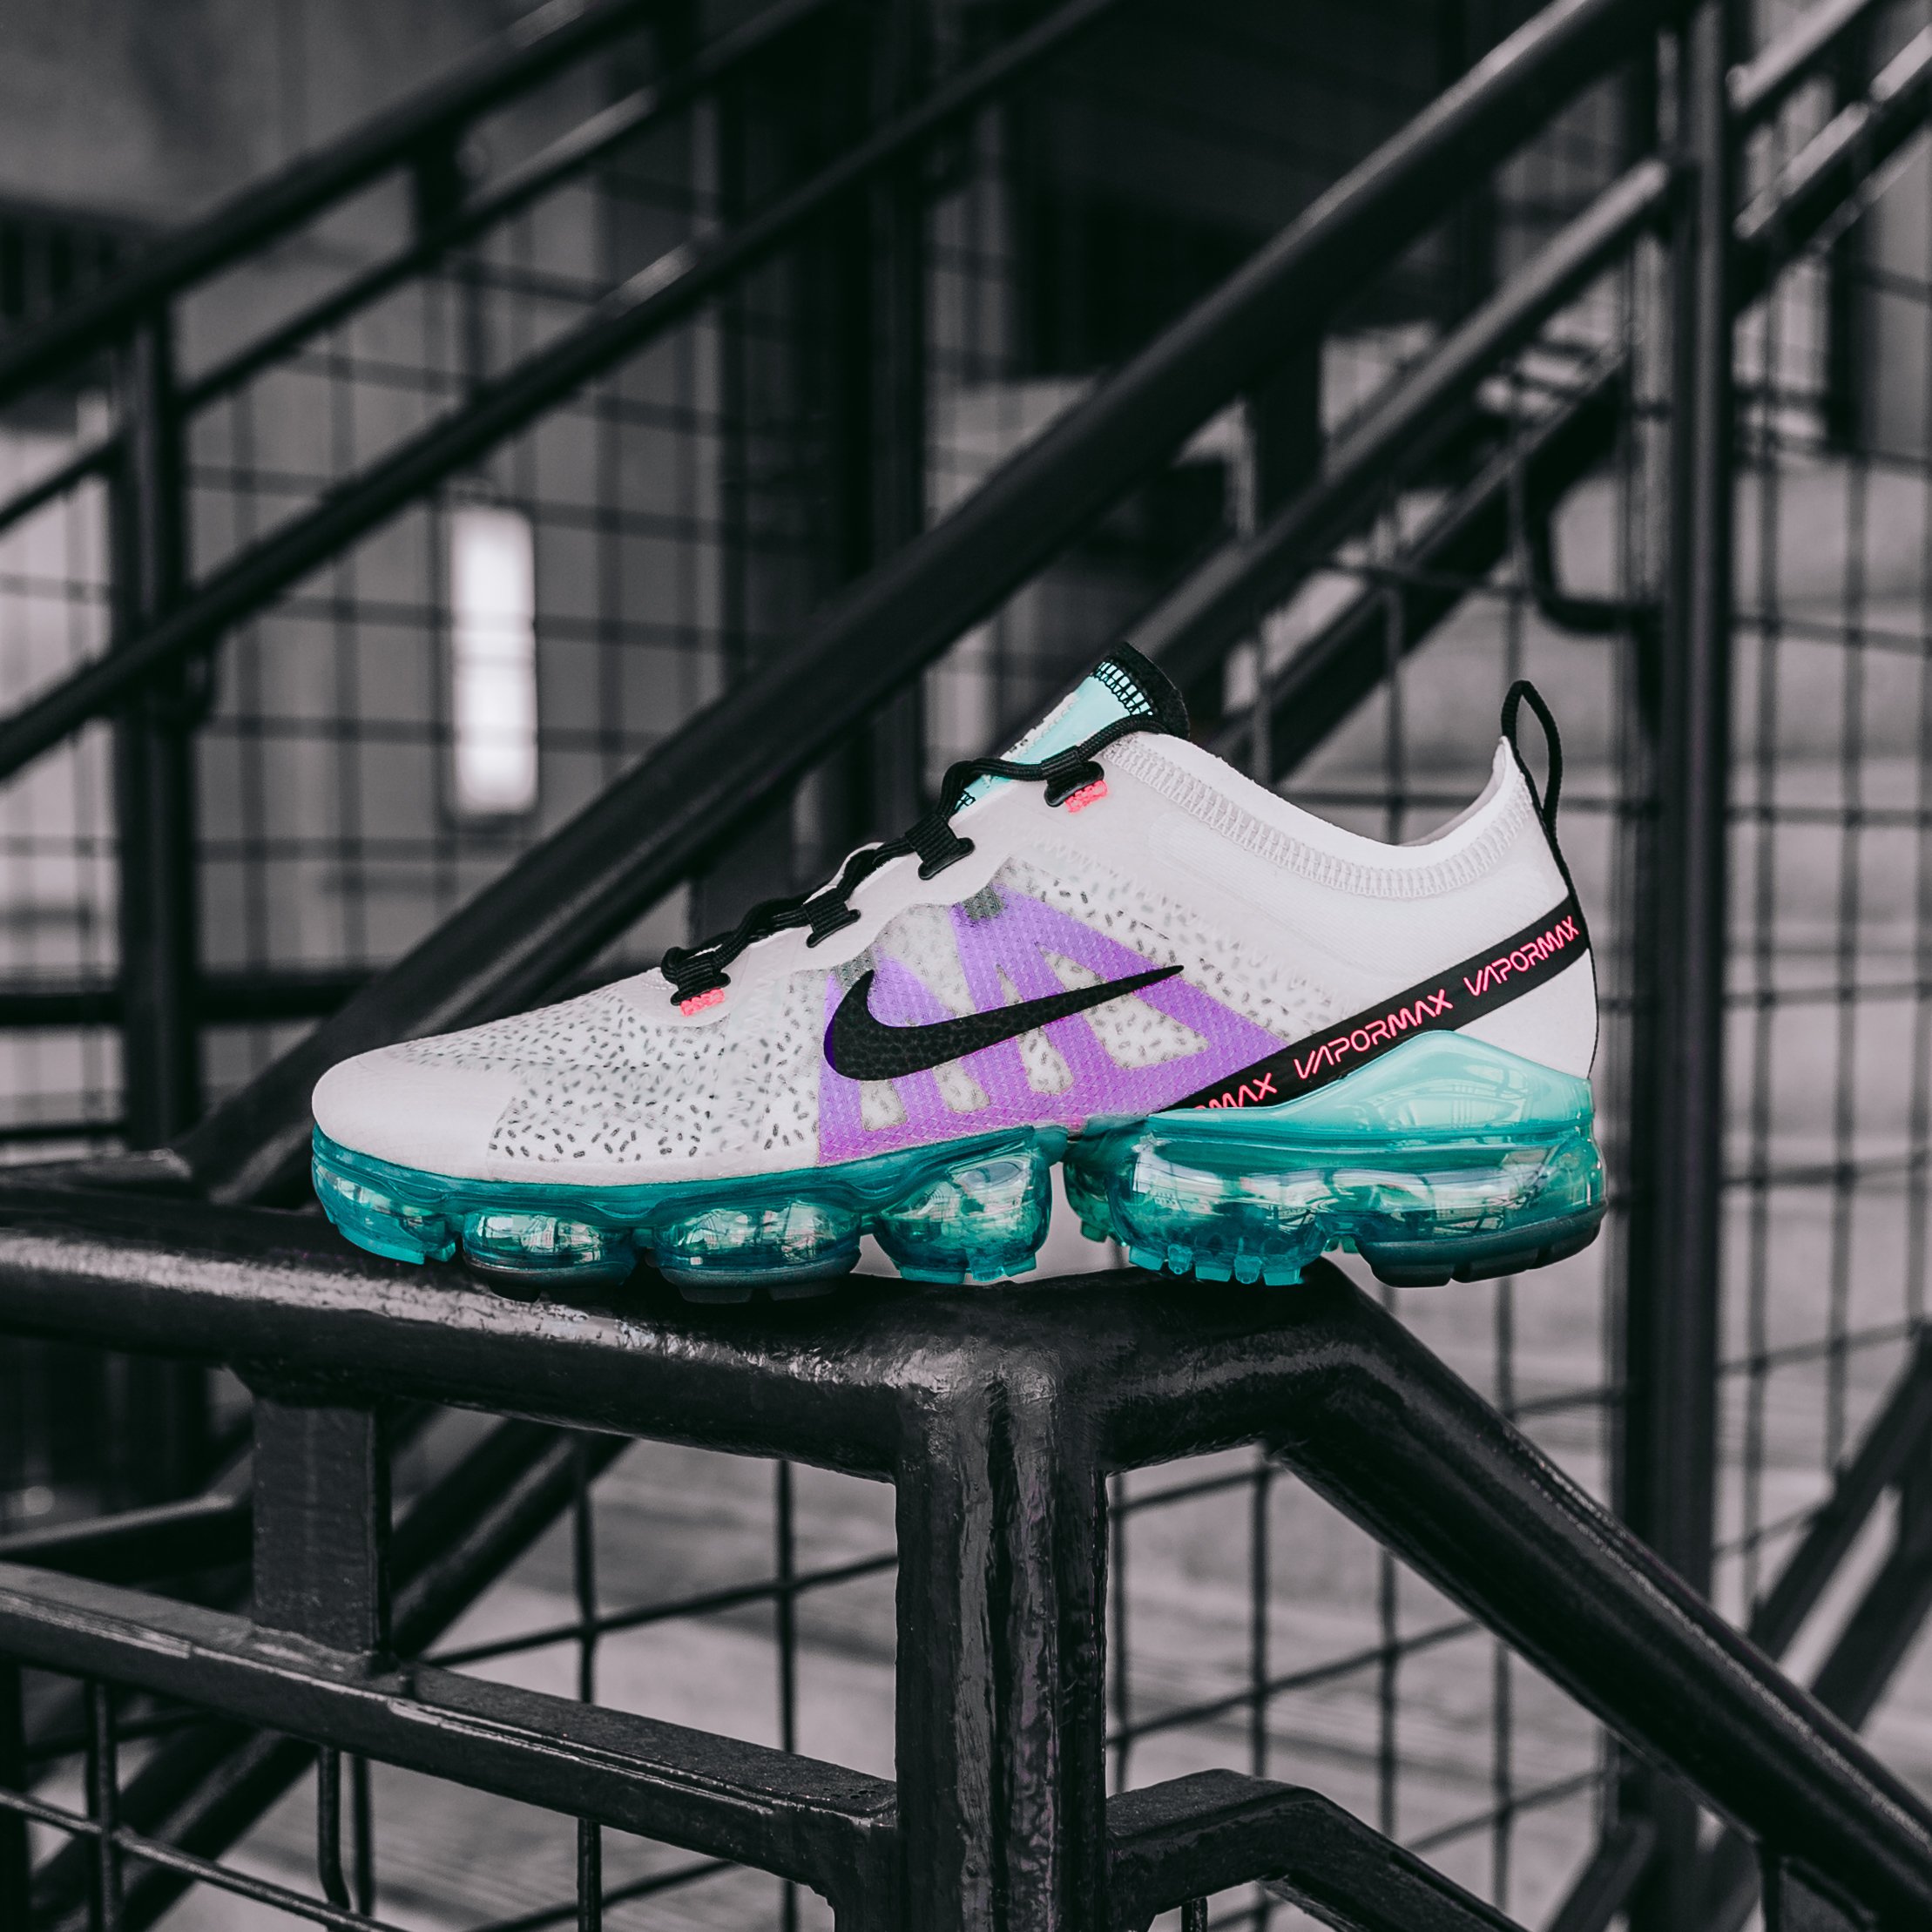 Kicks Lounge on Twitter: "The Nike Air Vapormax 2019 takes inspiration from a dragon fruit with this new colorway. A pure platinum translucent while the underlay sports a pattern to mimic